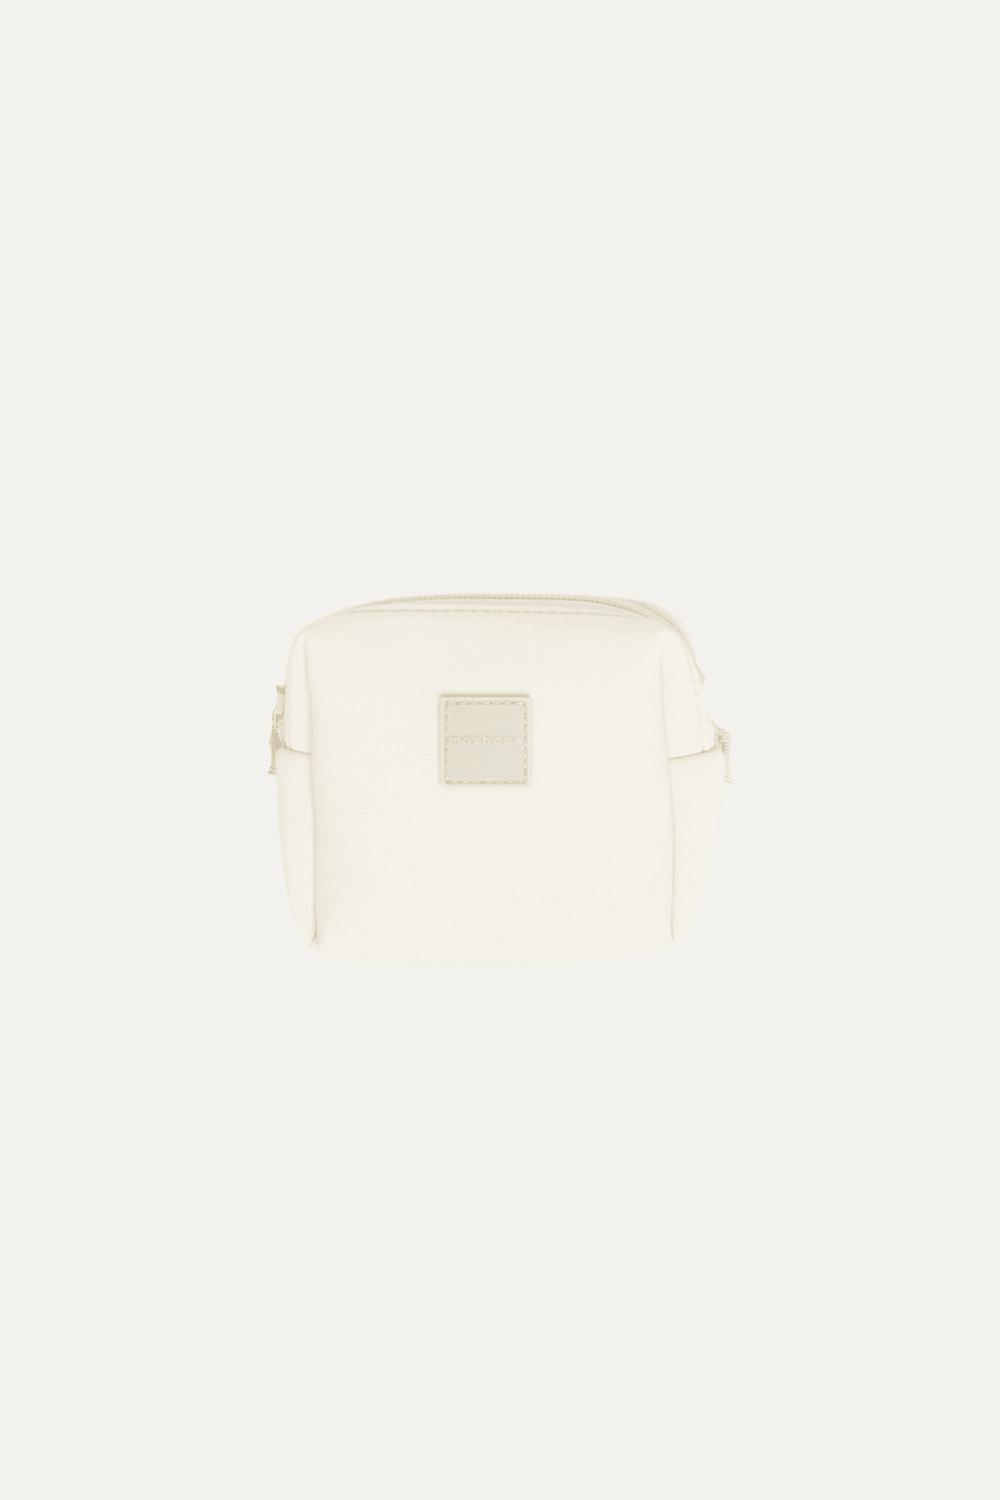 Go with Ease Pouch: Small / Peach